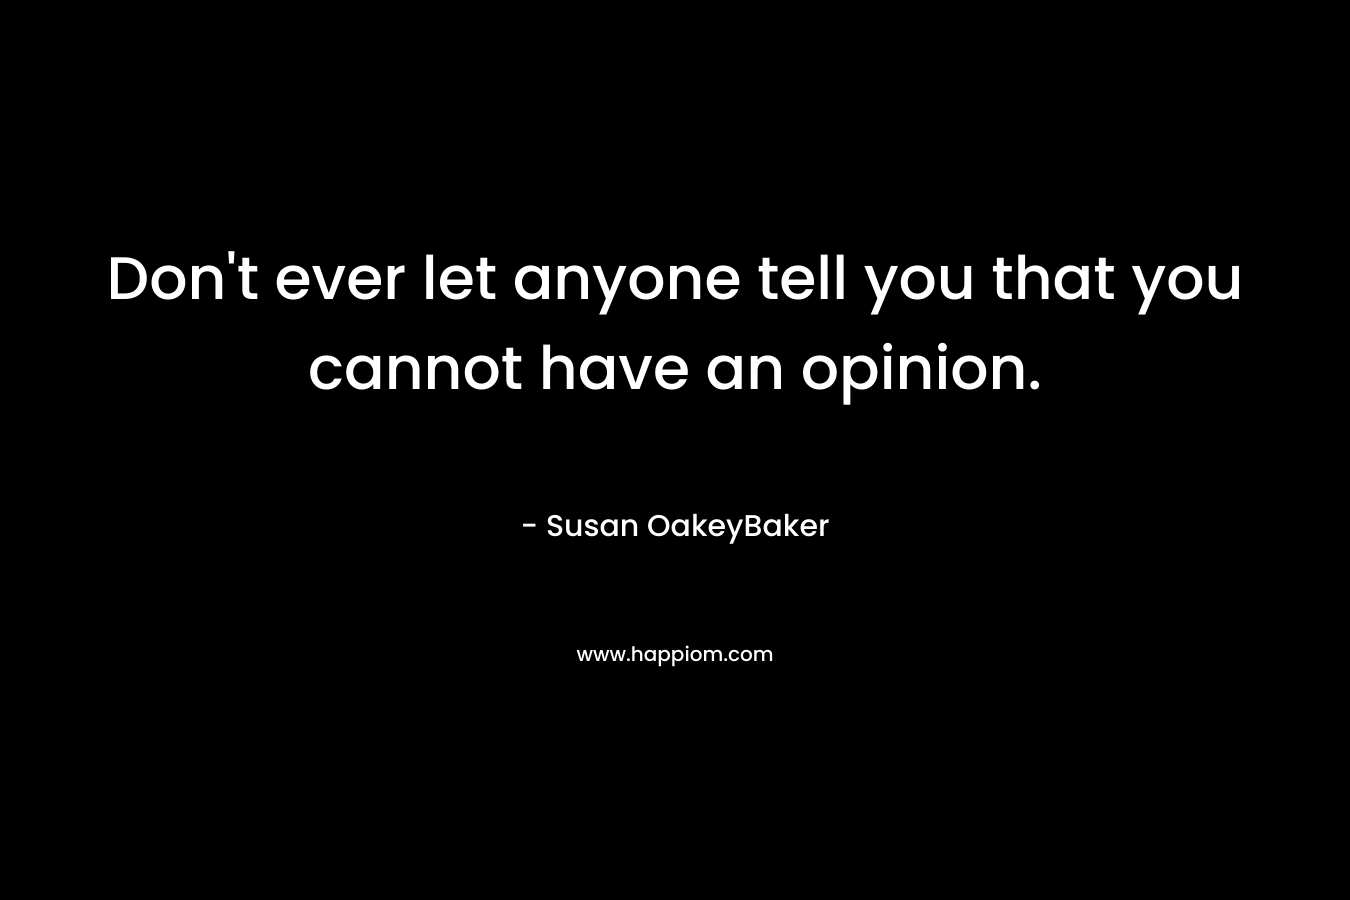 Don’t ever let anyone tell you that you cannot have an opinion. – Susan OakeyBaker